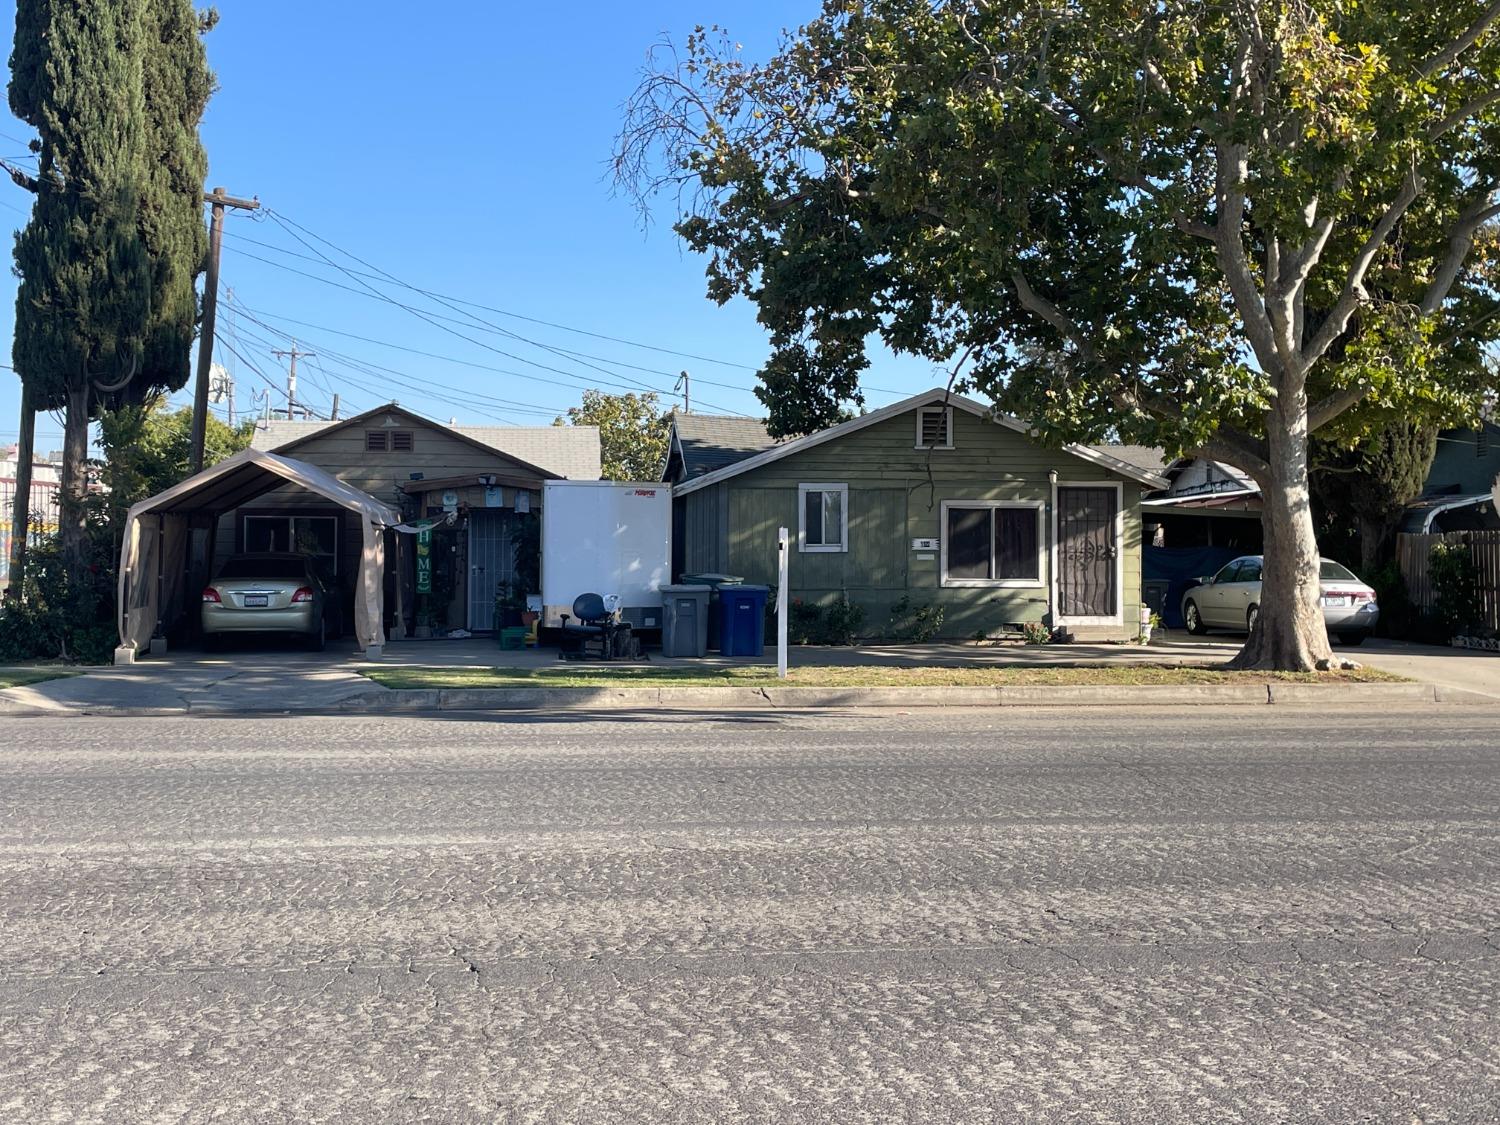 Great investment opportunity to own 2 houses on one lot. Homes are 3 bedroom 1 bathroom and 2 bedroom 1 bathroom. Great tenant history. Close to churches, schools, stores and easy freeway access. Property has lots of potential. Must see to appreciate!